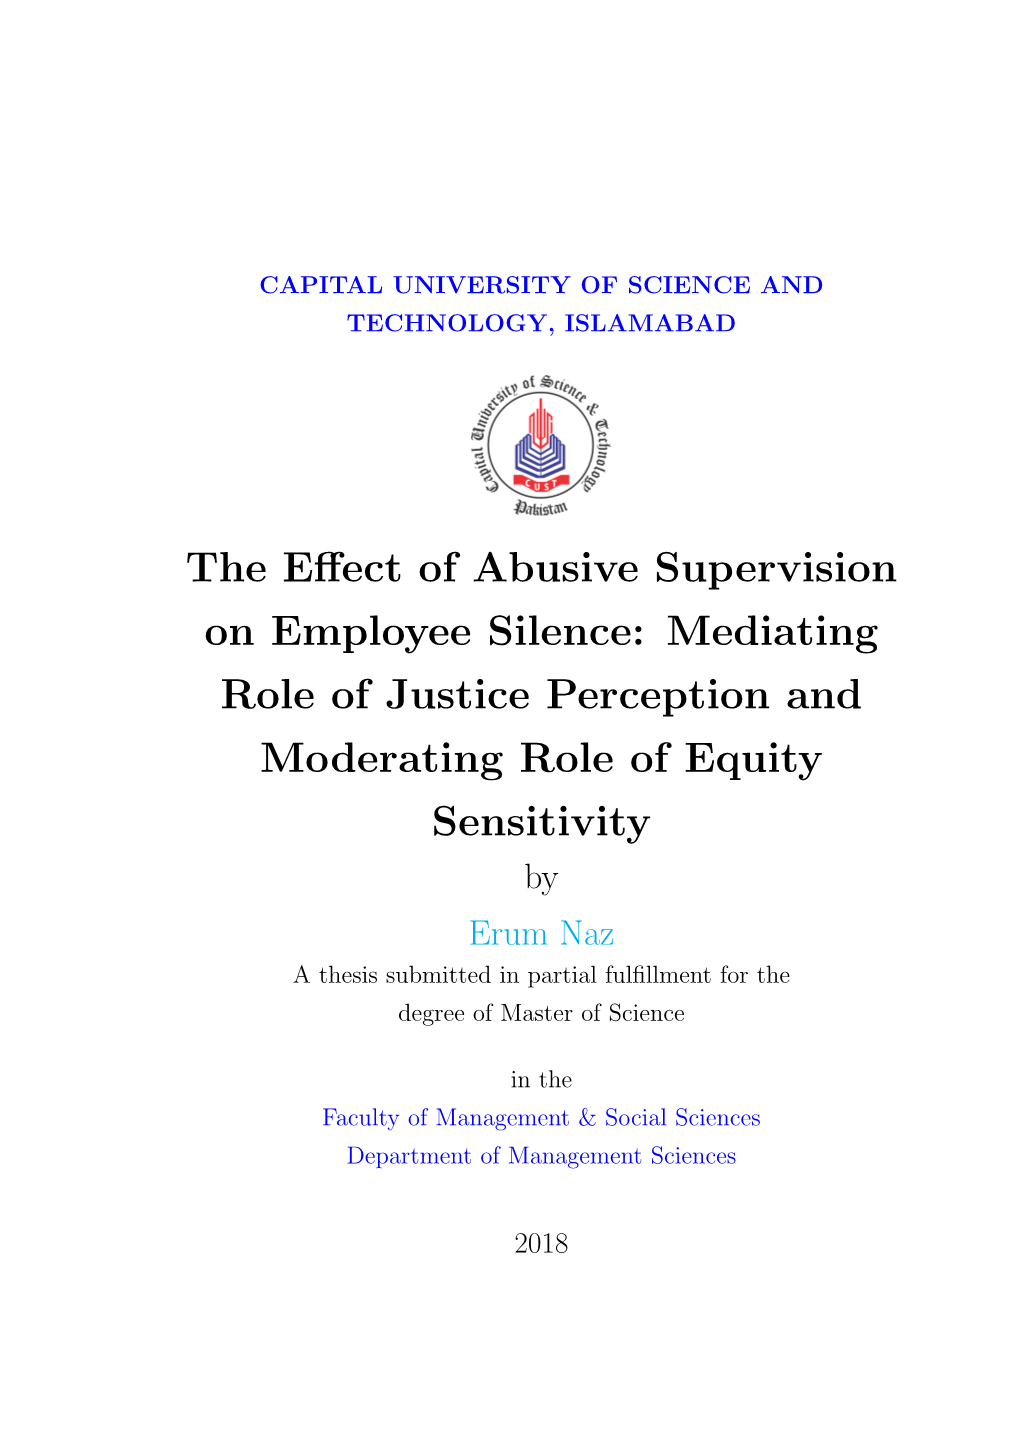 The Effect of Abusive Supervision on Employee Silence: Mediating Role